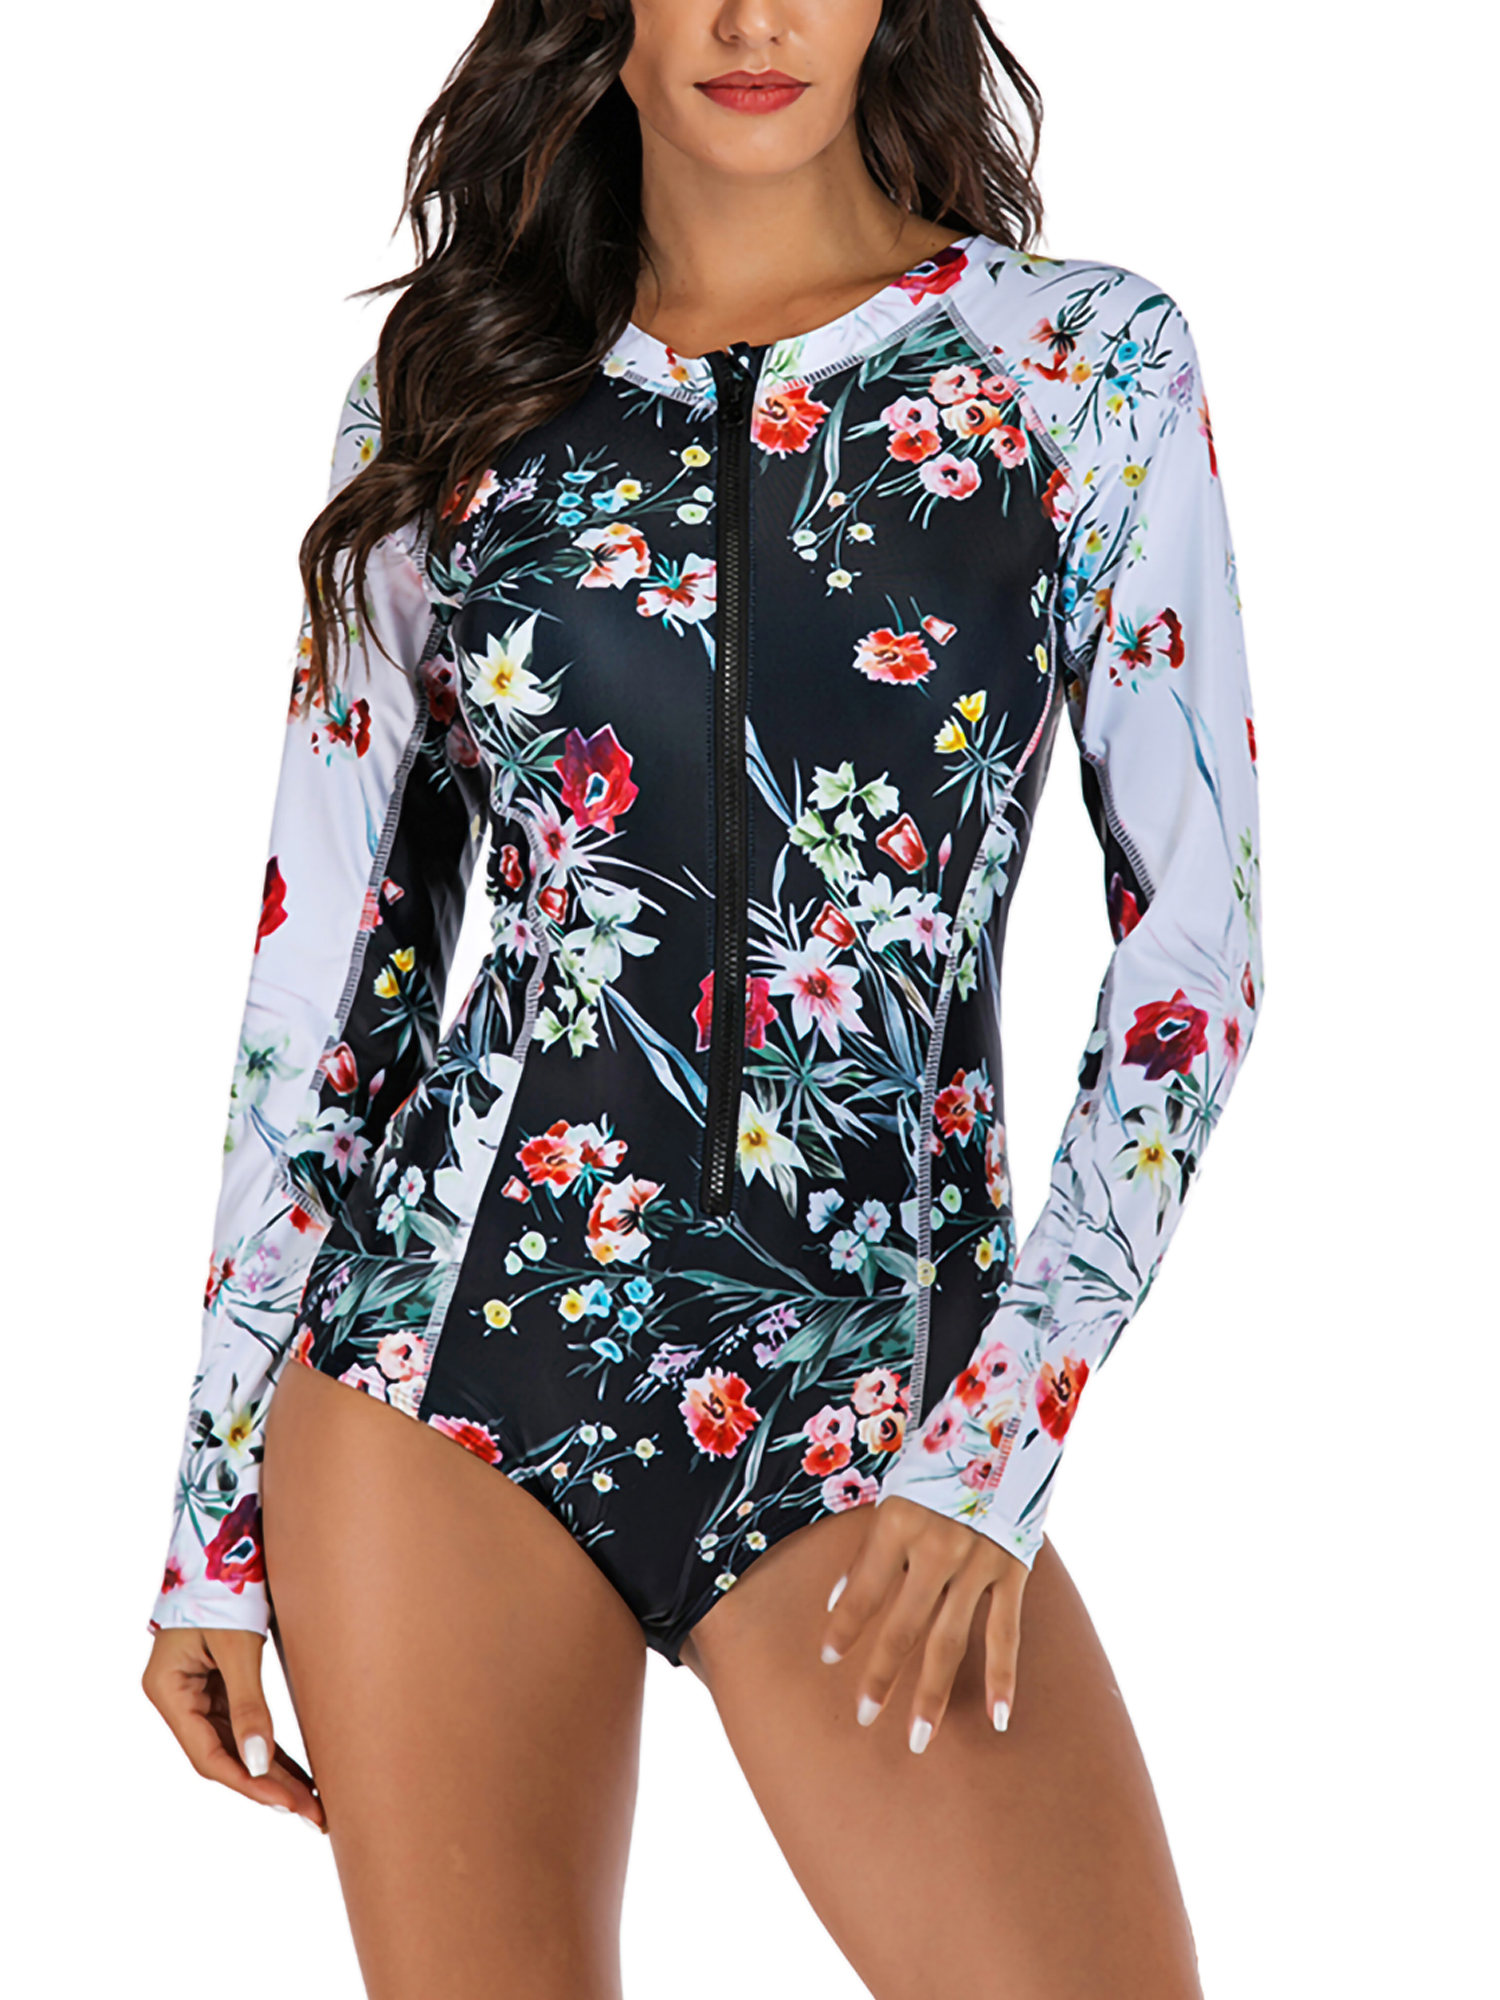 Long Sleeve One-piece Swimsuits for Women Surfing Diving Suit Bathing Suits Sexy Ladies S-2XL Floral Tummy Control - image 1 of 8